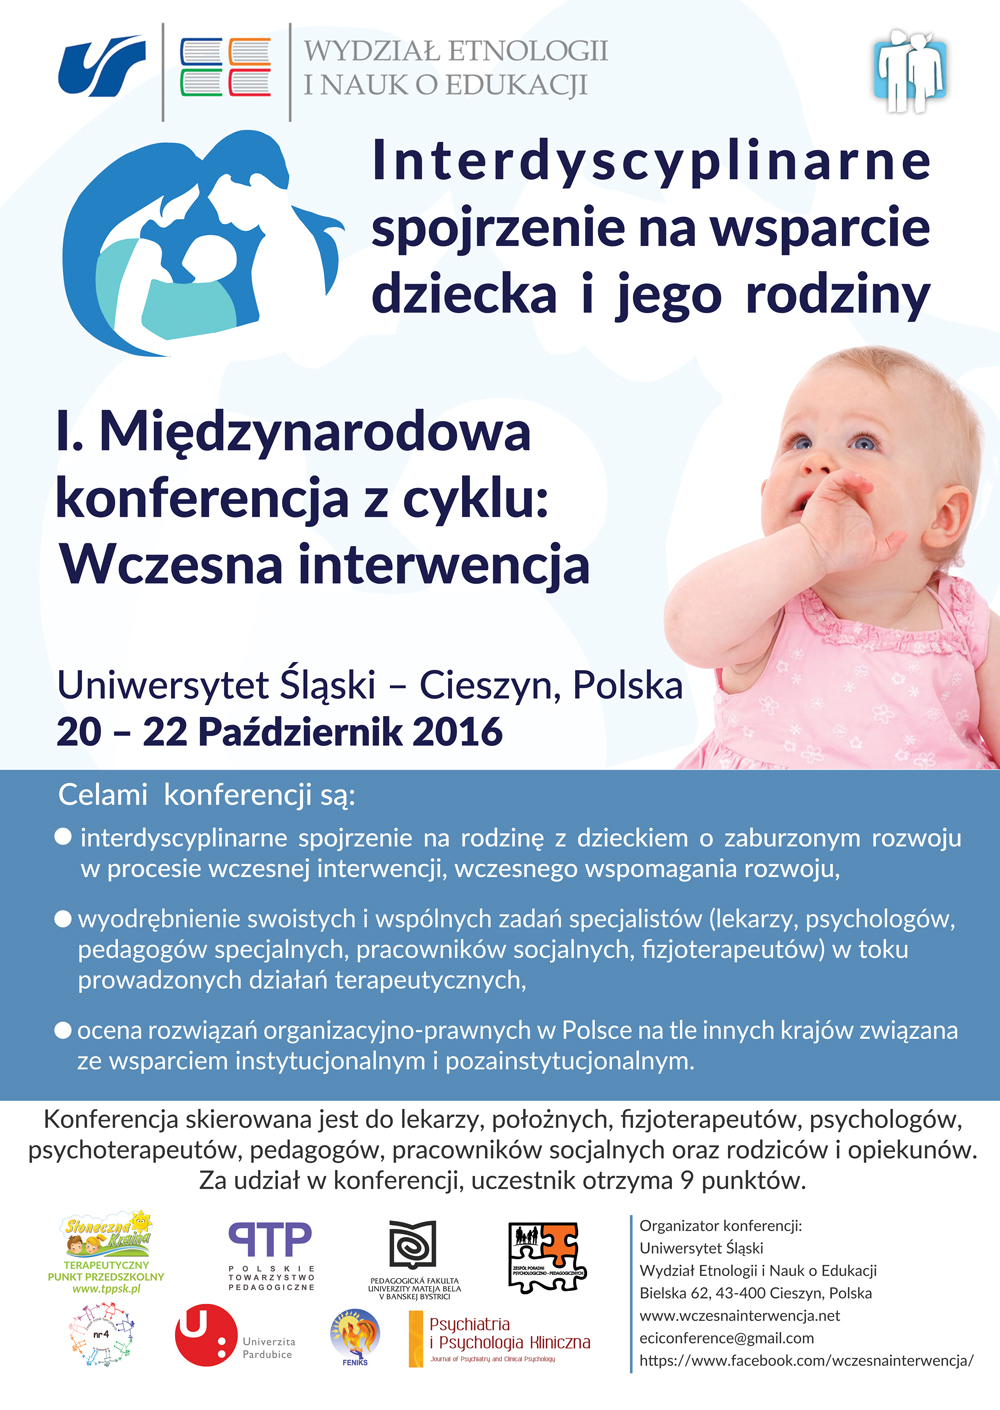 Child and family support Interdisciplinary overview 1st International Conference "Early Childhood Intervention", Cieszyn, slaskie, Poland